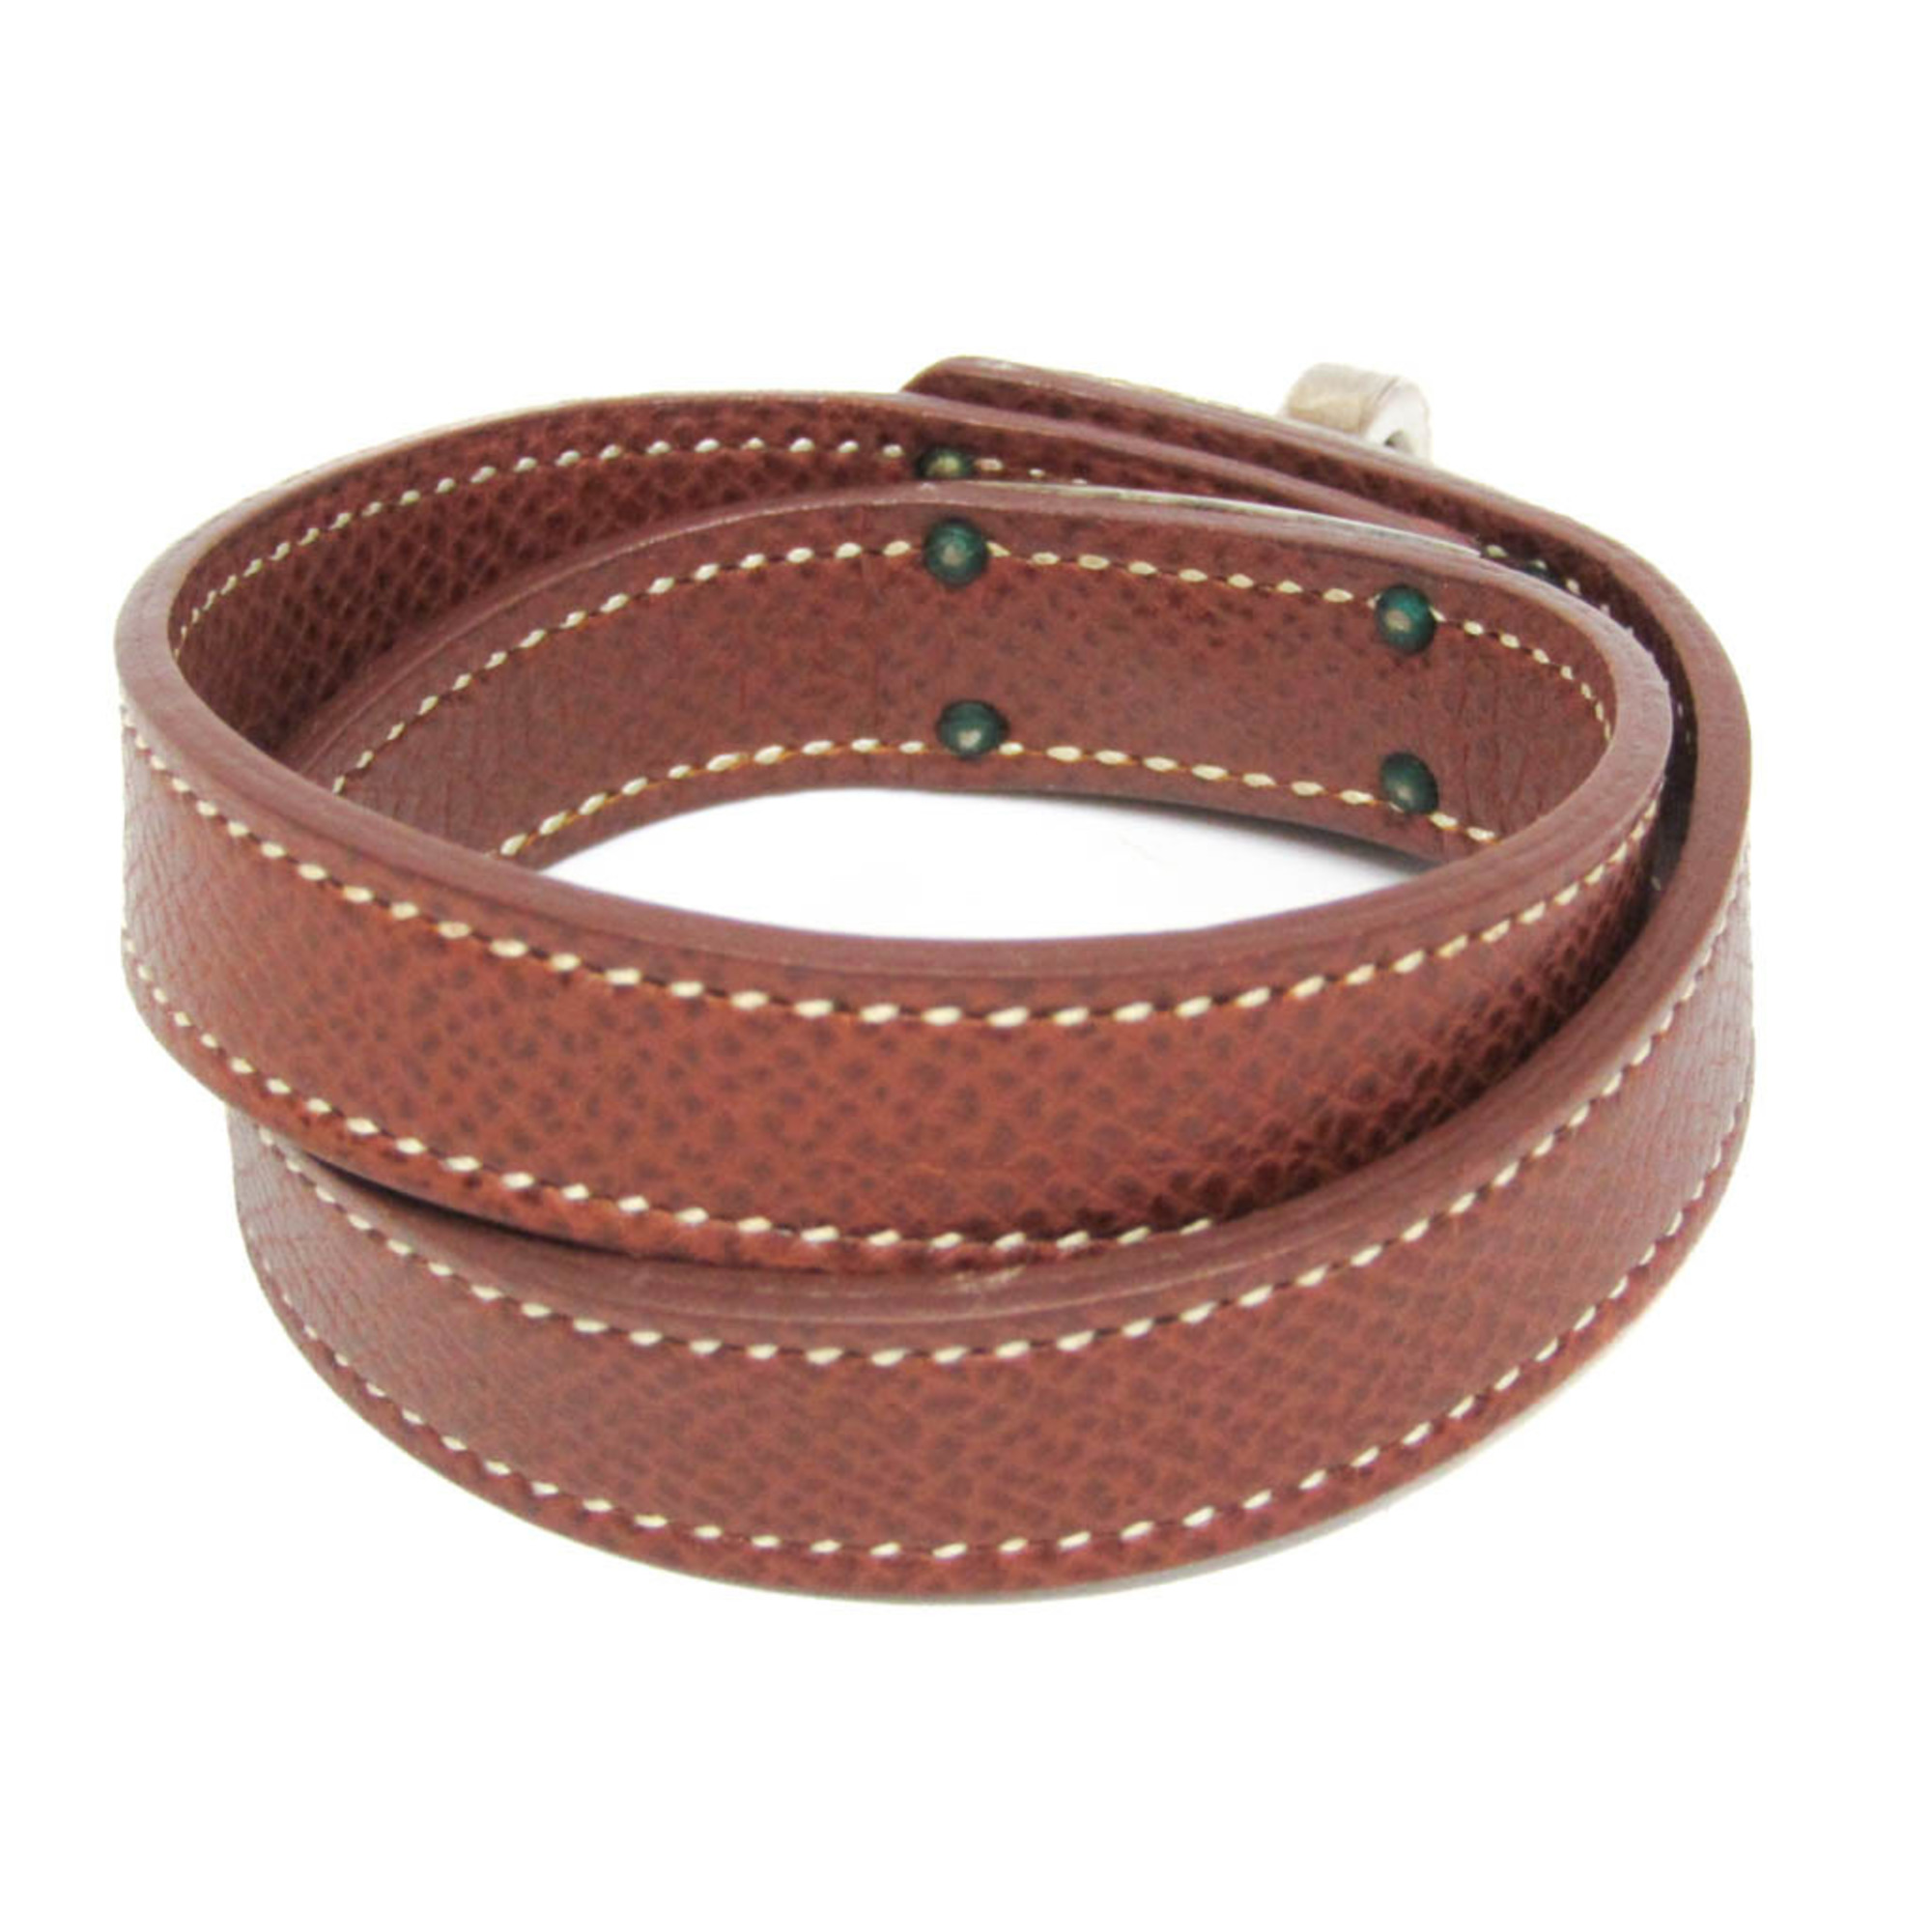 Hermes Kelly Double Tour Leather,Metal Bangle Dark Brown